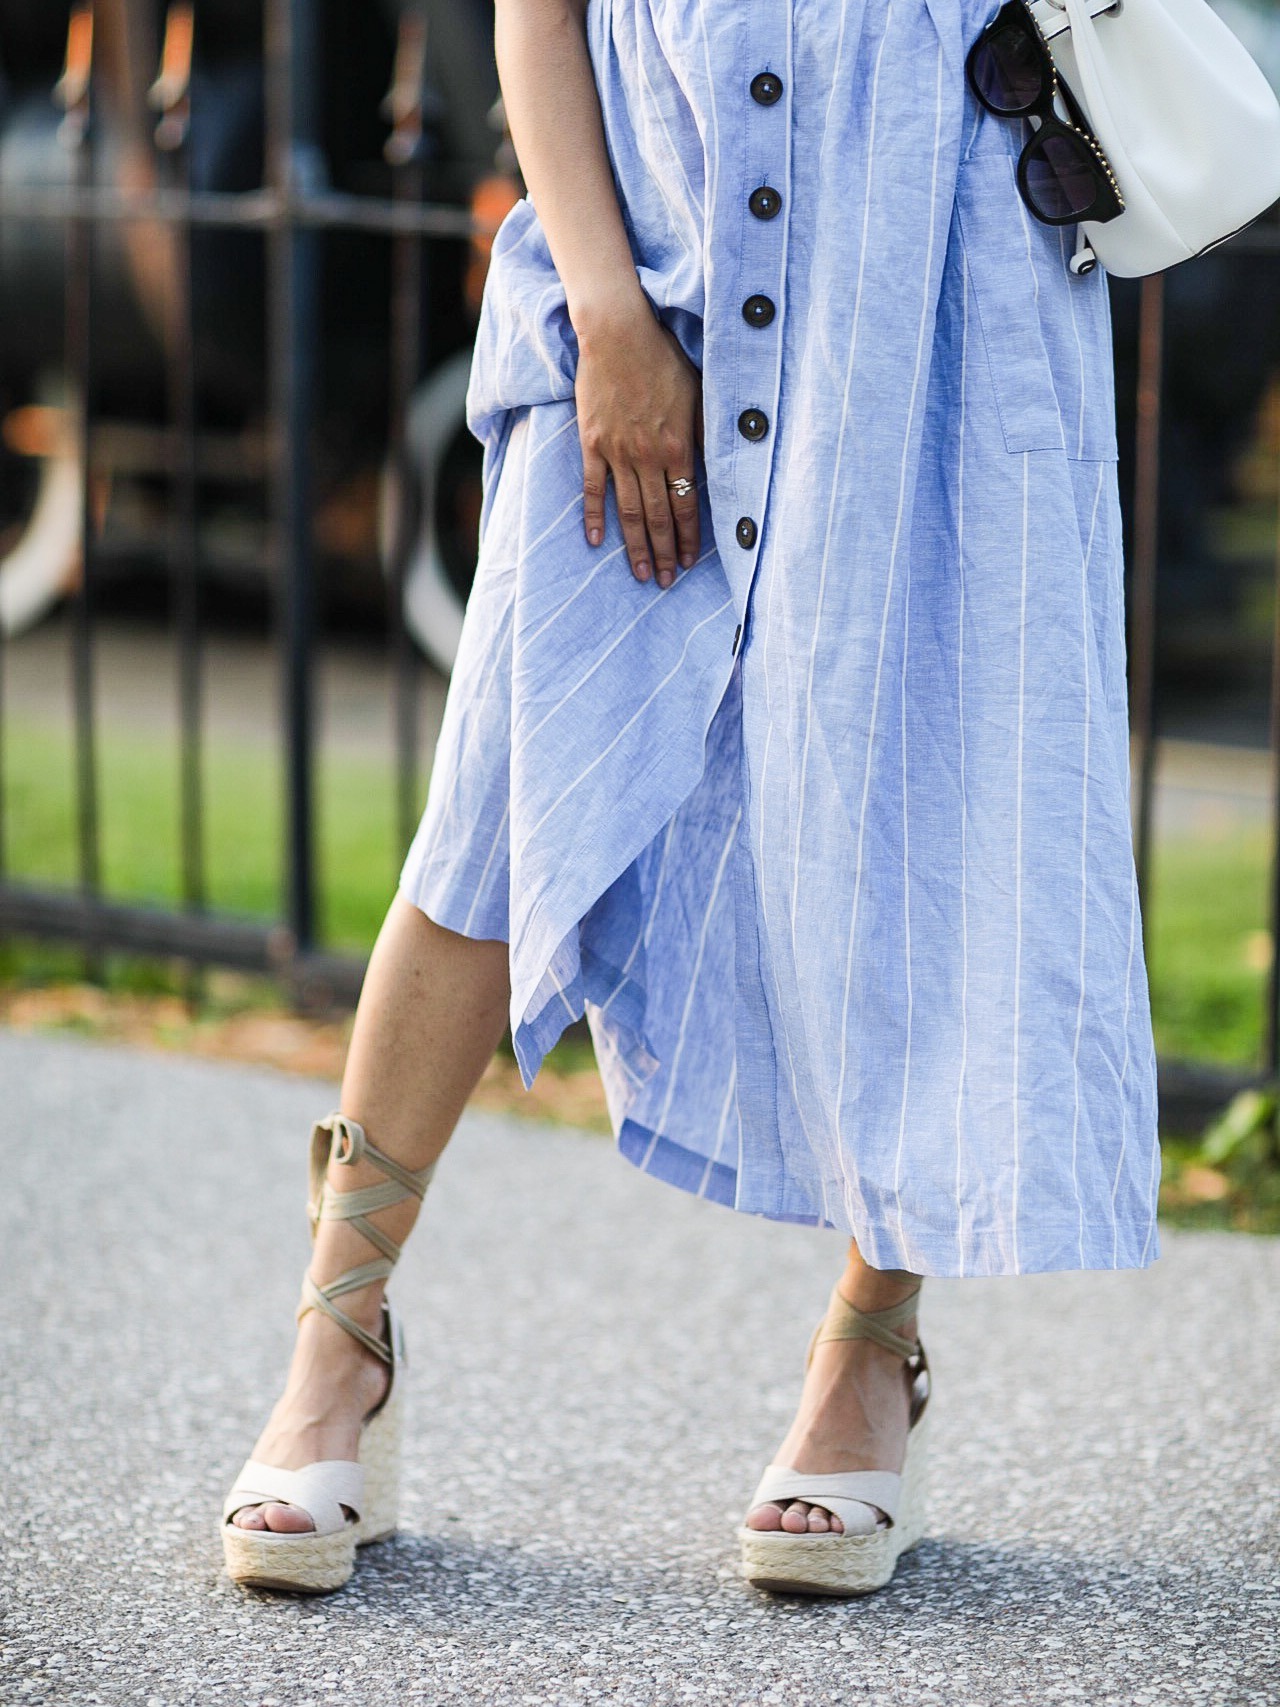 Add these Trending Summer Shoes to your Wishlist Lace up Wedges Lulus White heels 2019 trend Sincerely Humble Faiza Inam Puffy Sleeves Bouse Yellow Floral 6